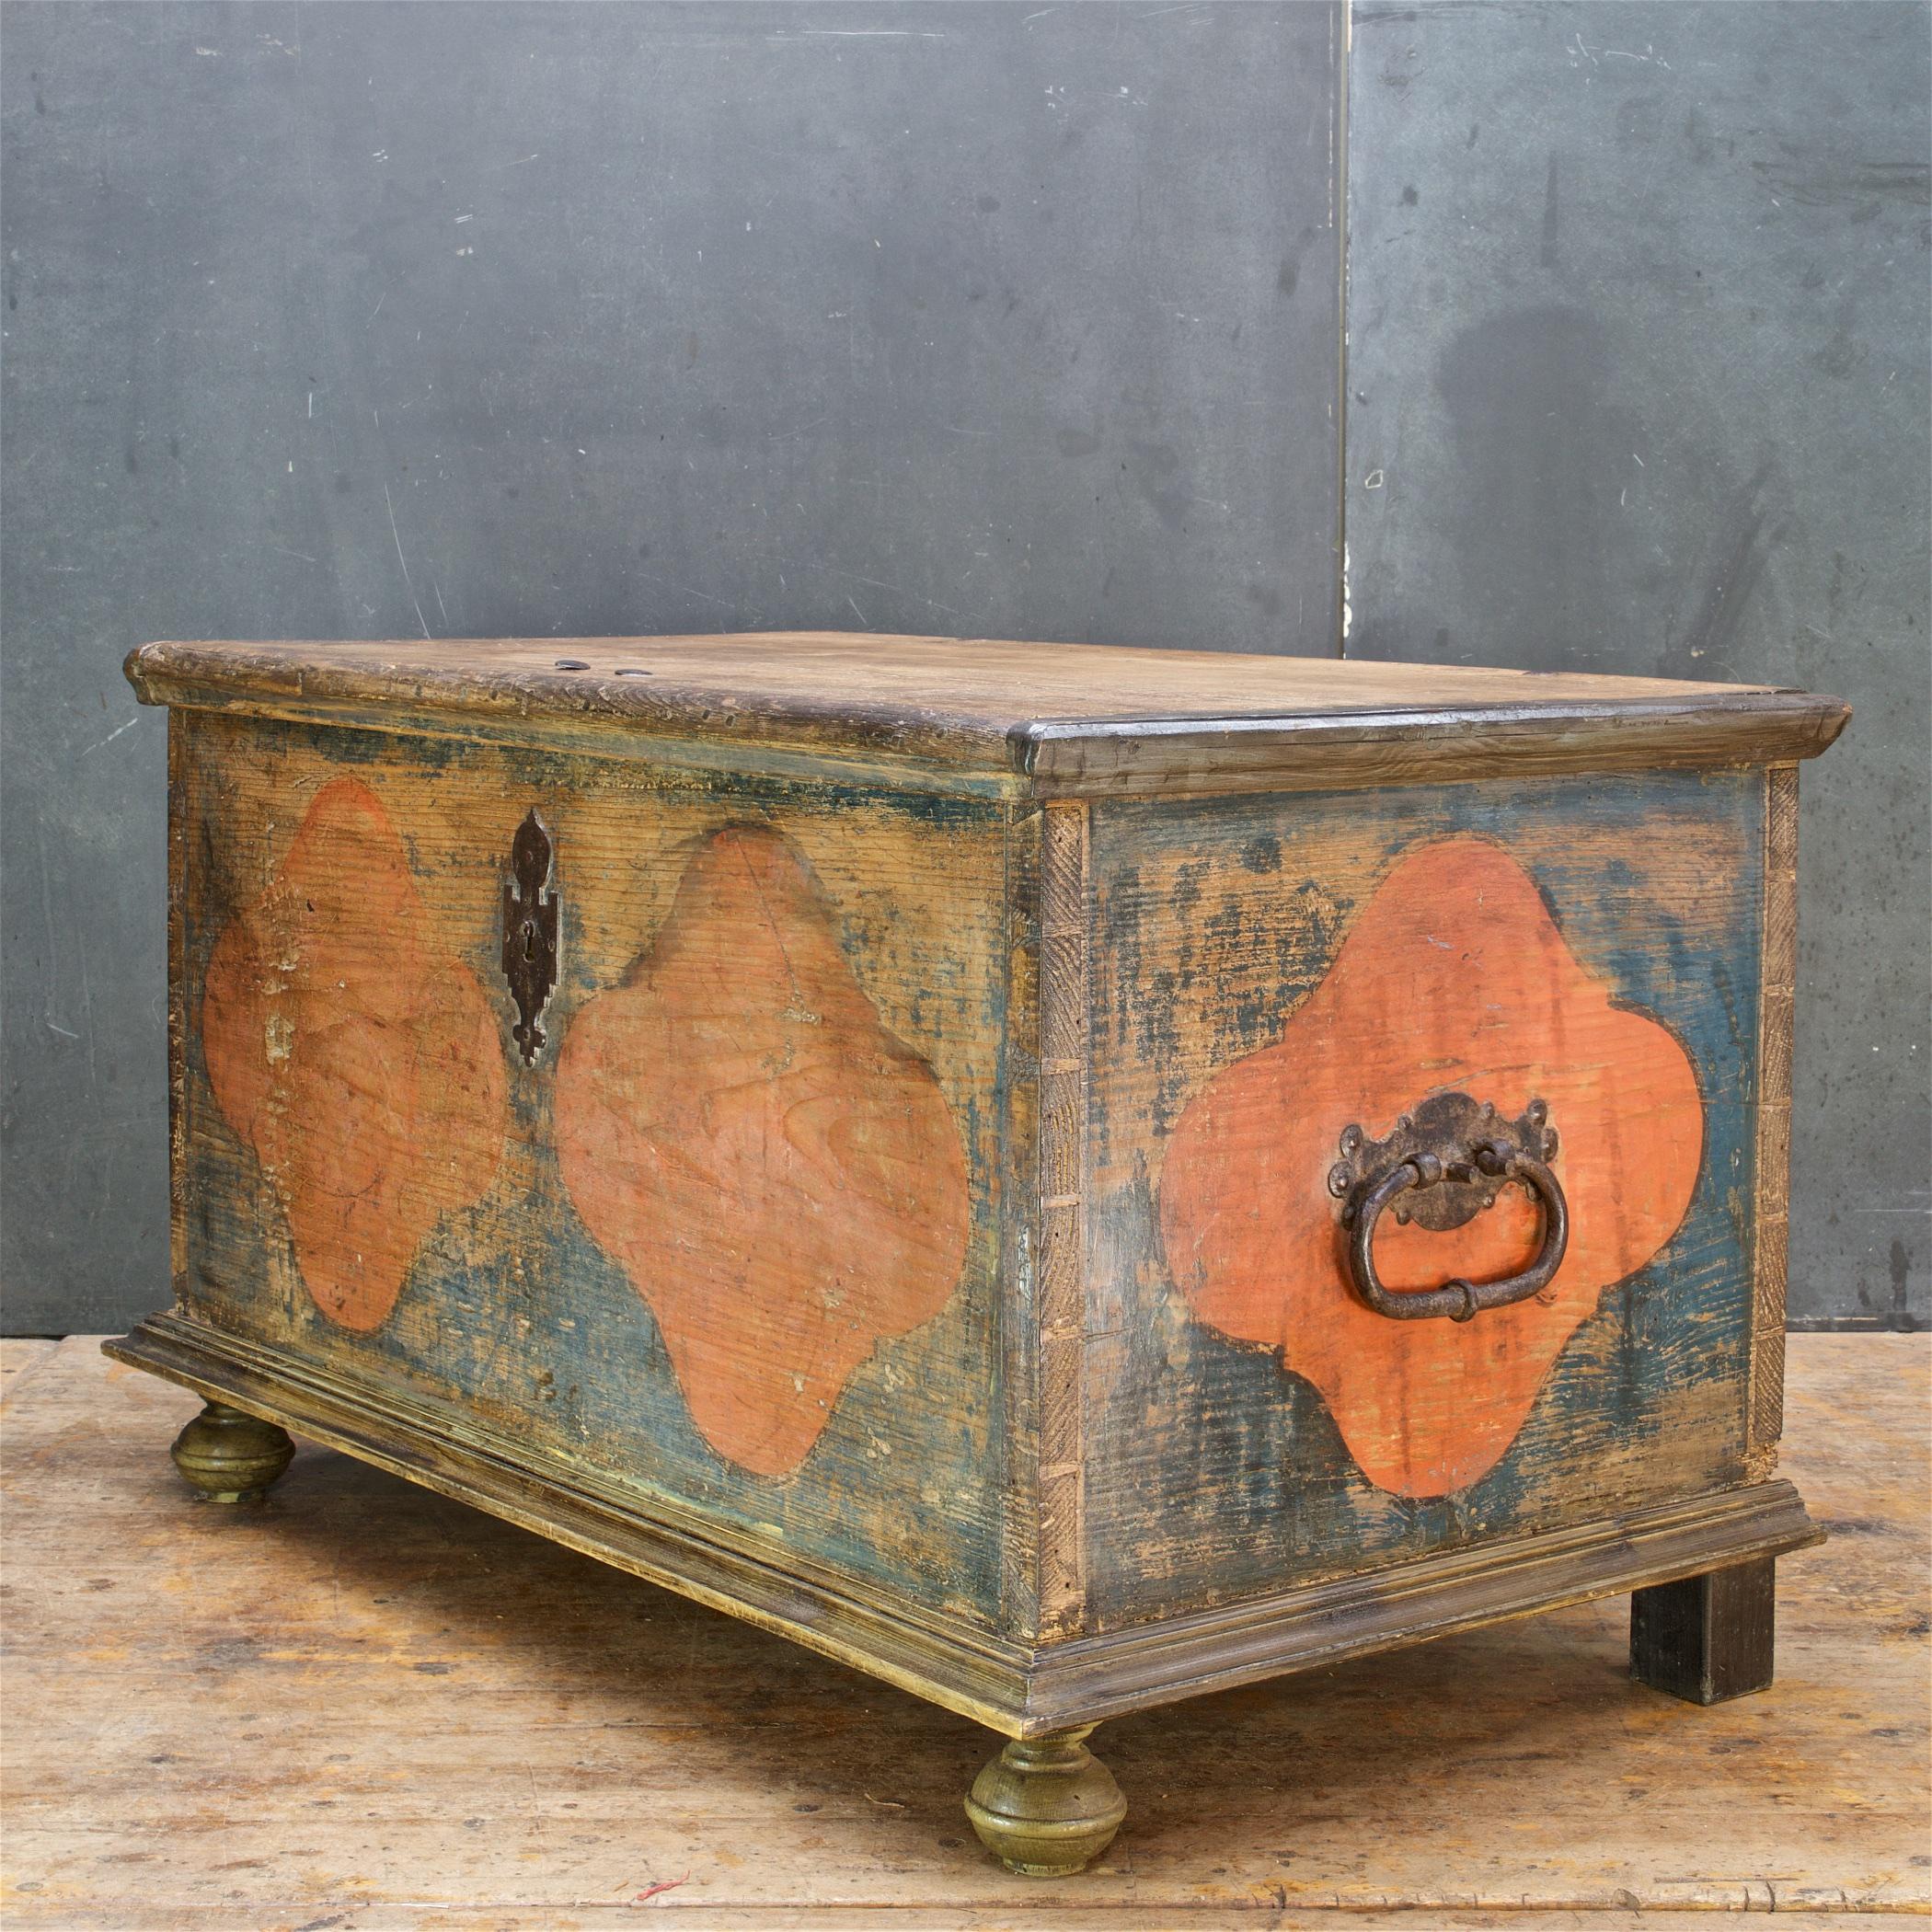 Hand-Crafted 19th Century Painted Swedish Blanket Chest Antique Bedroom Bench Trunk Folk Art